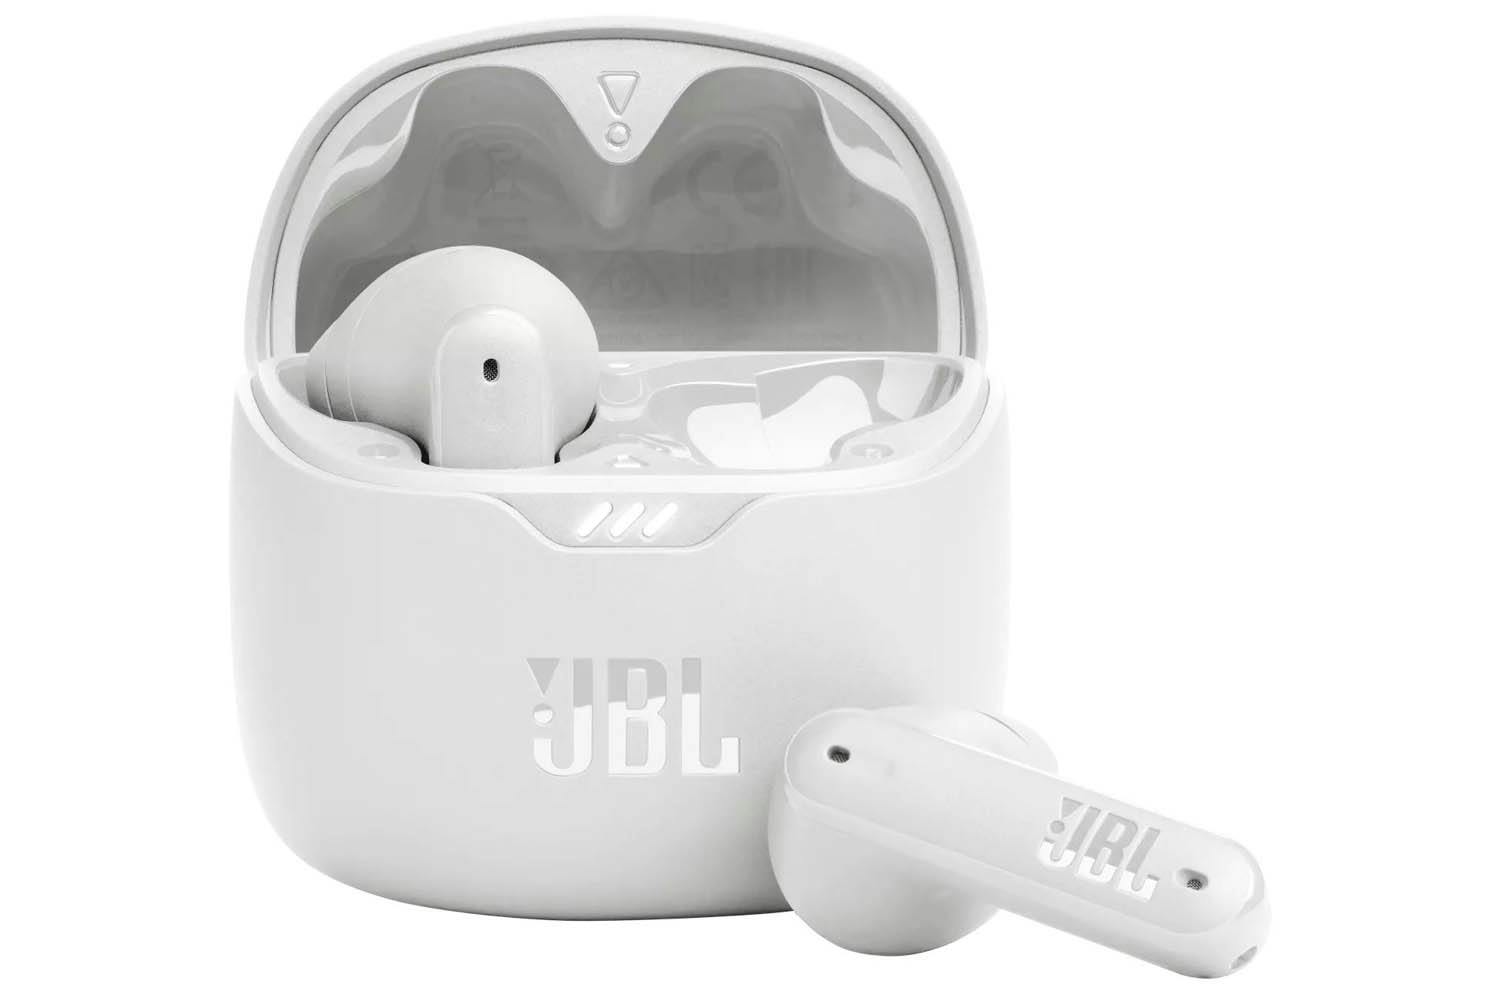 JBL Tune Flex Noise Cancelling Earbuds, White